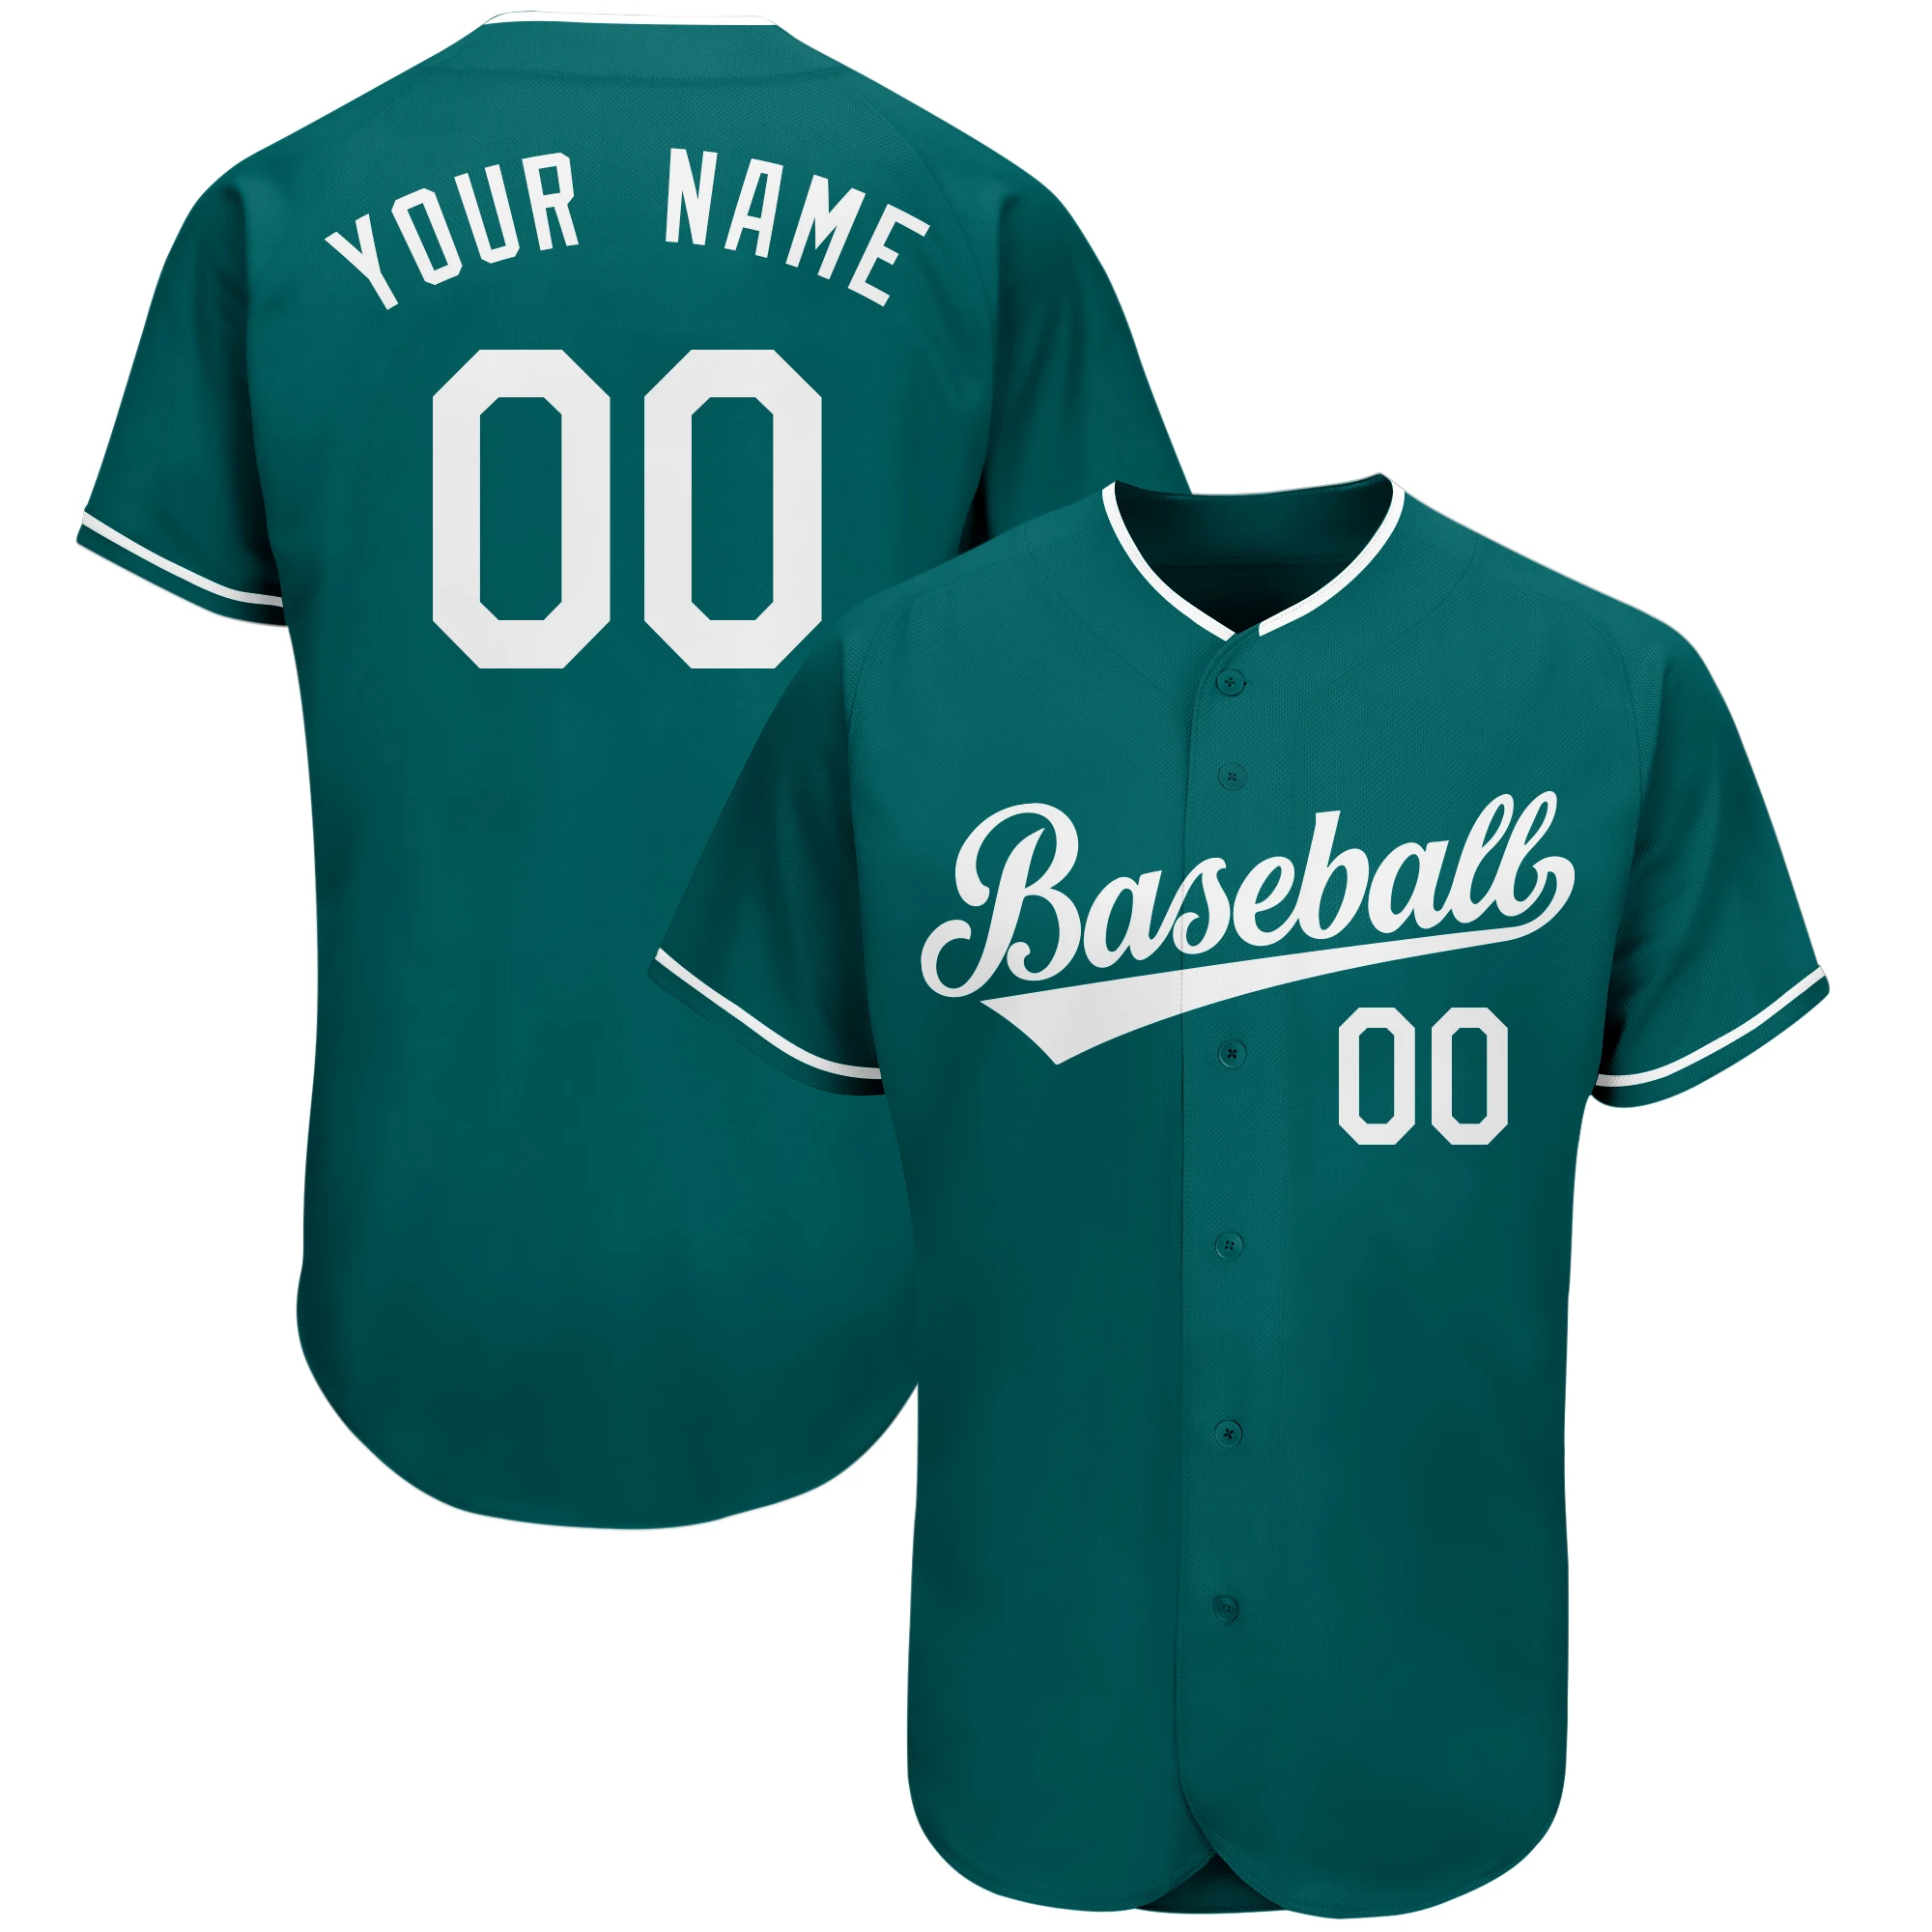 

Custom Baseball Jerseys College League Printing Team Name Number Add Logo to Make Your Own Baseball Shirt for Men/Youth/Women